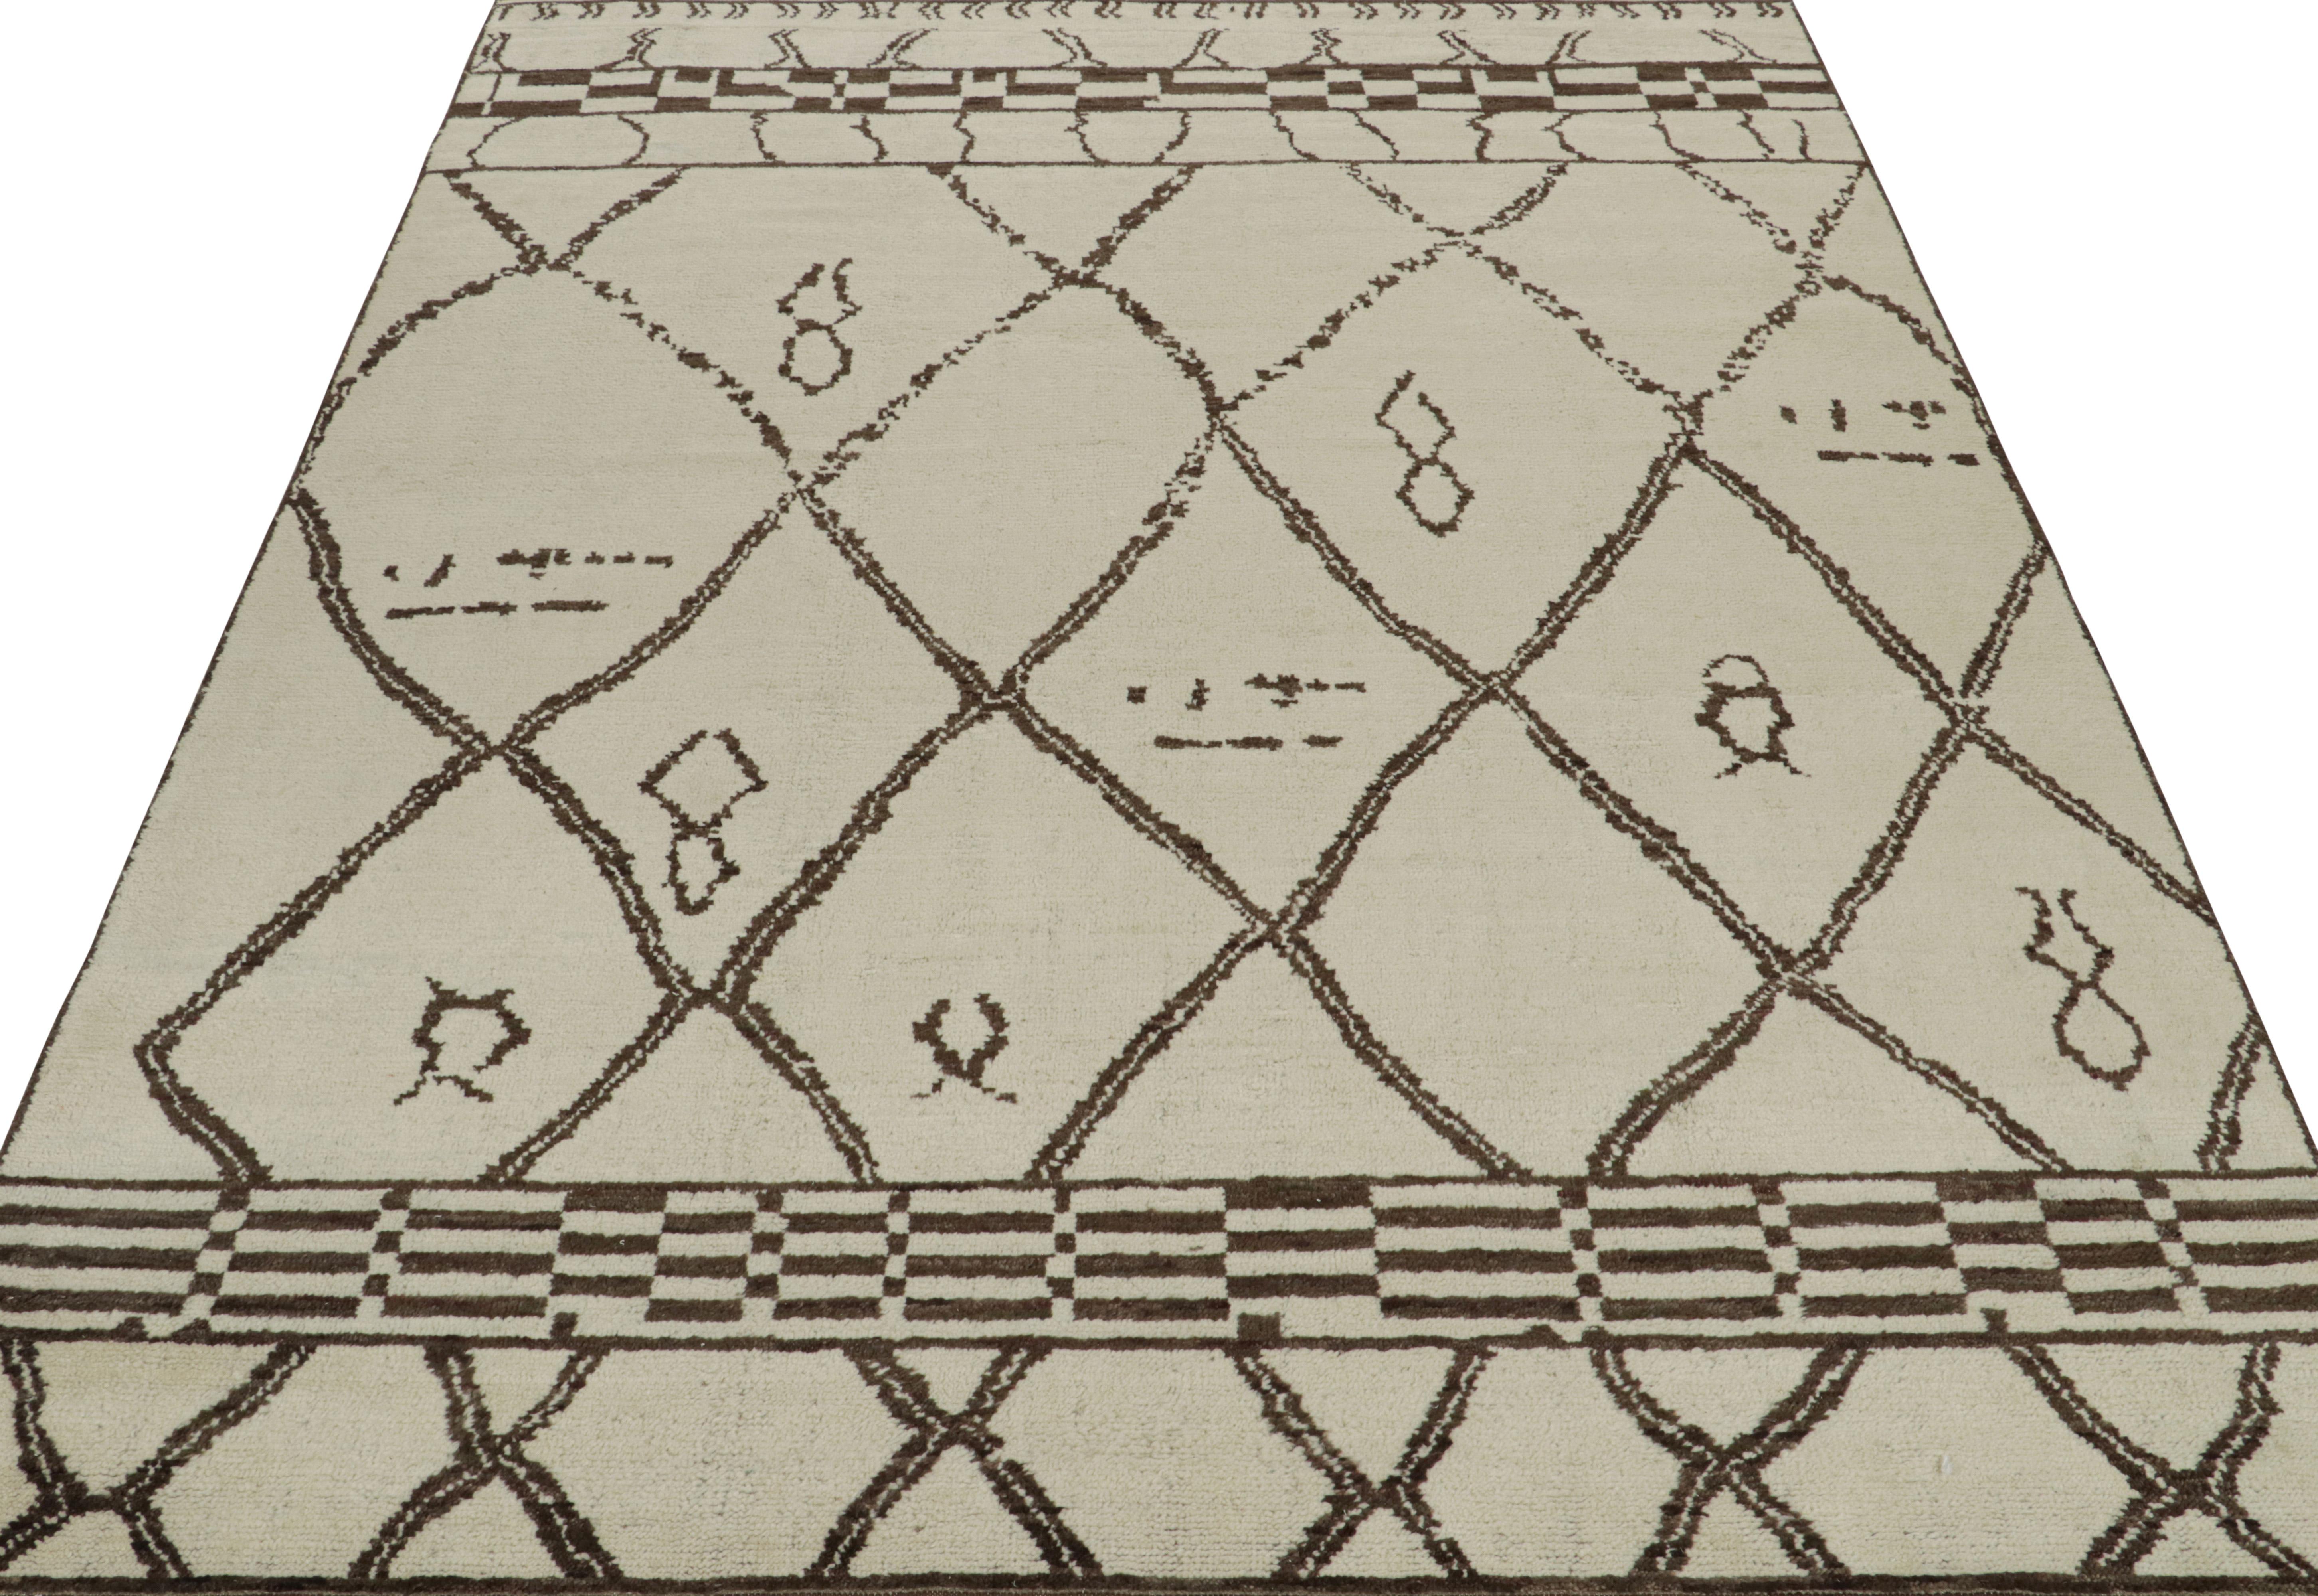 This contemporary 9x12 rug is a grand entry in Rug & Kilim's new Moroccan Collection—a bold take on the iconic style. Hand-knotted in wool and cotton.
Further on the Design:
The piece draws on geometric patterns and archaic motifs in rich brown with